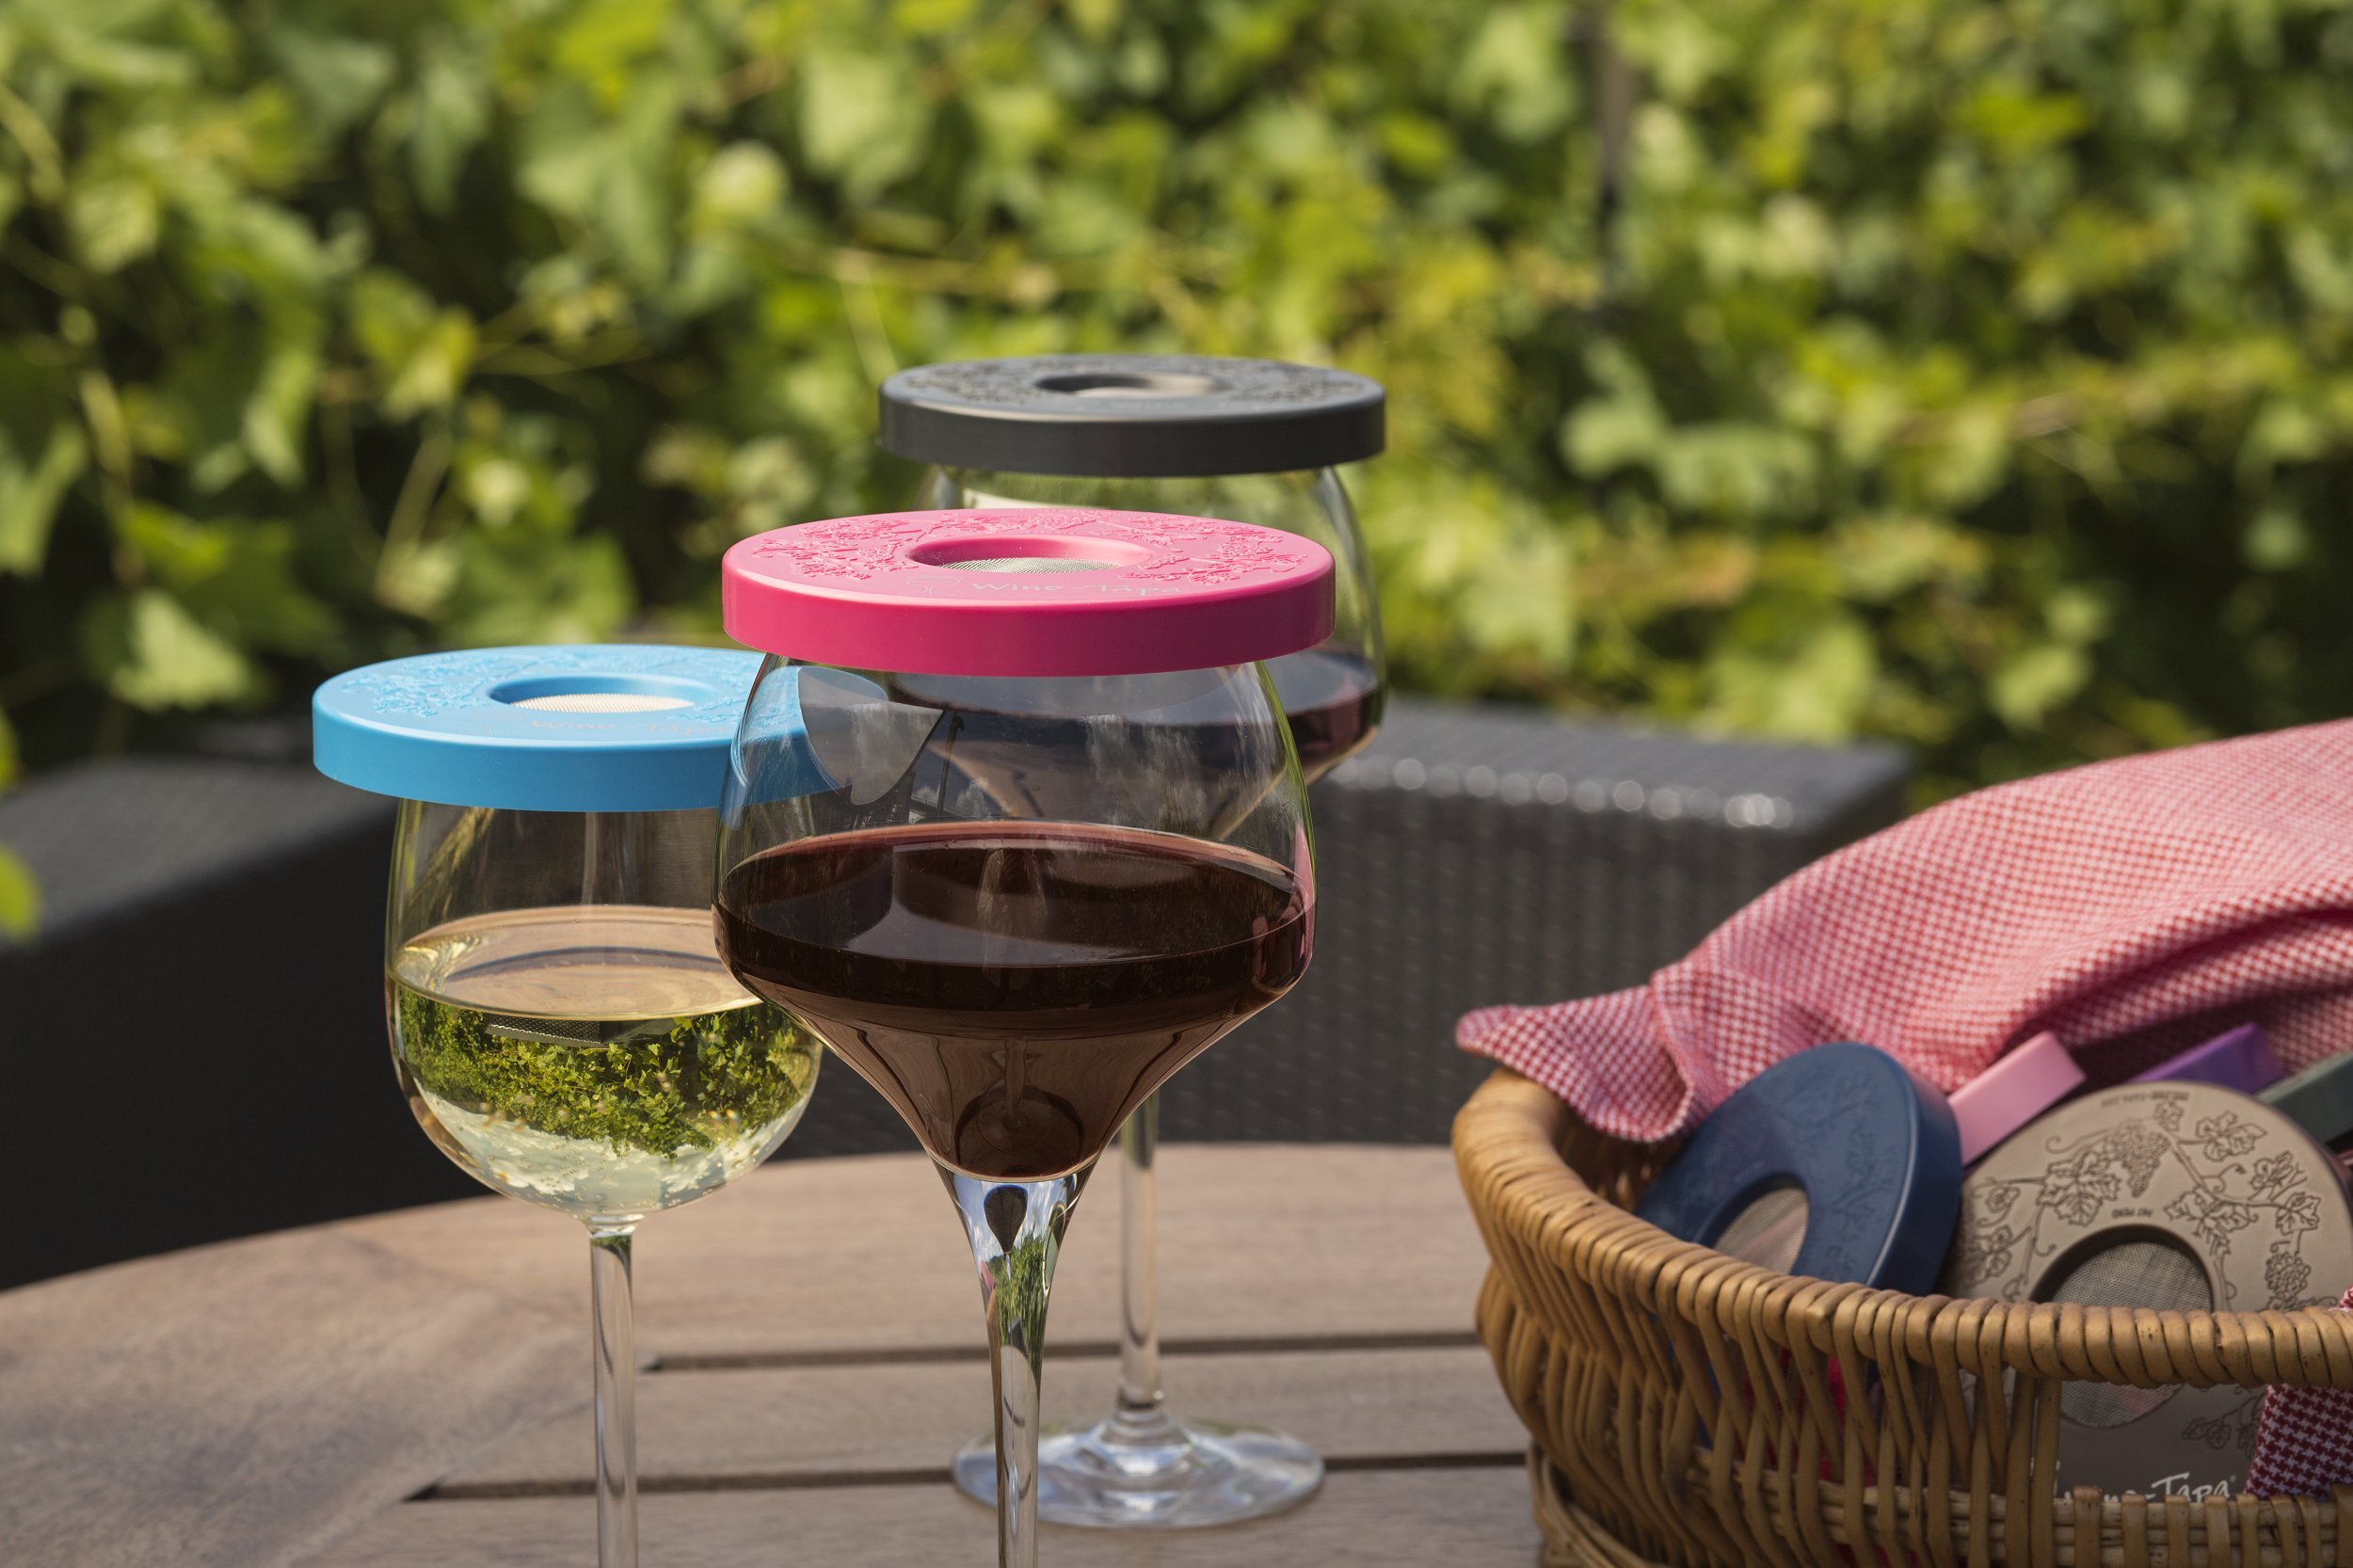 Wine-Tapa(R) Cabana Set of 6 Wine Glass Covers in Six Bright, Beautiful Colors - To Protect Your Wine Glass from Bugs & Insects